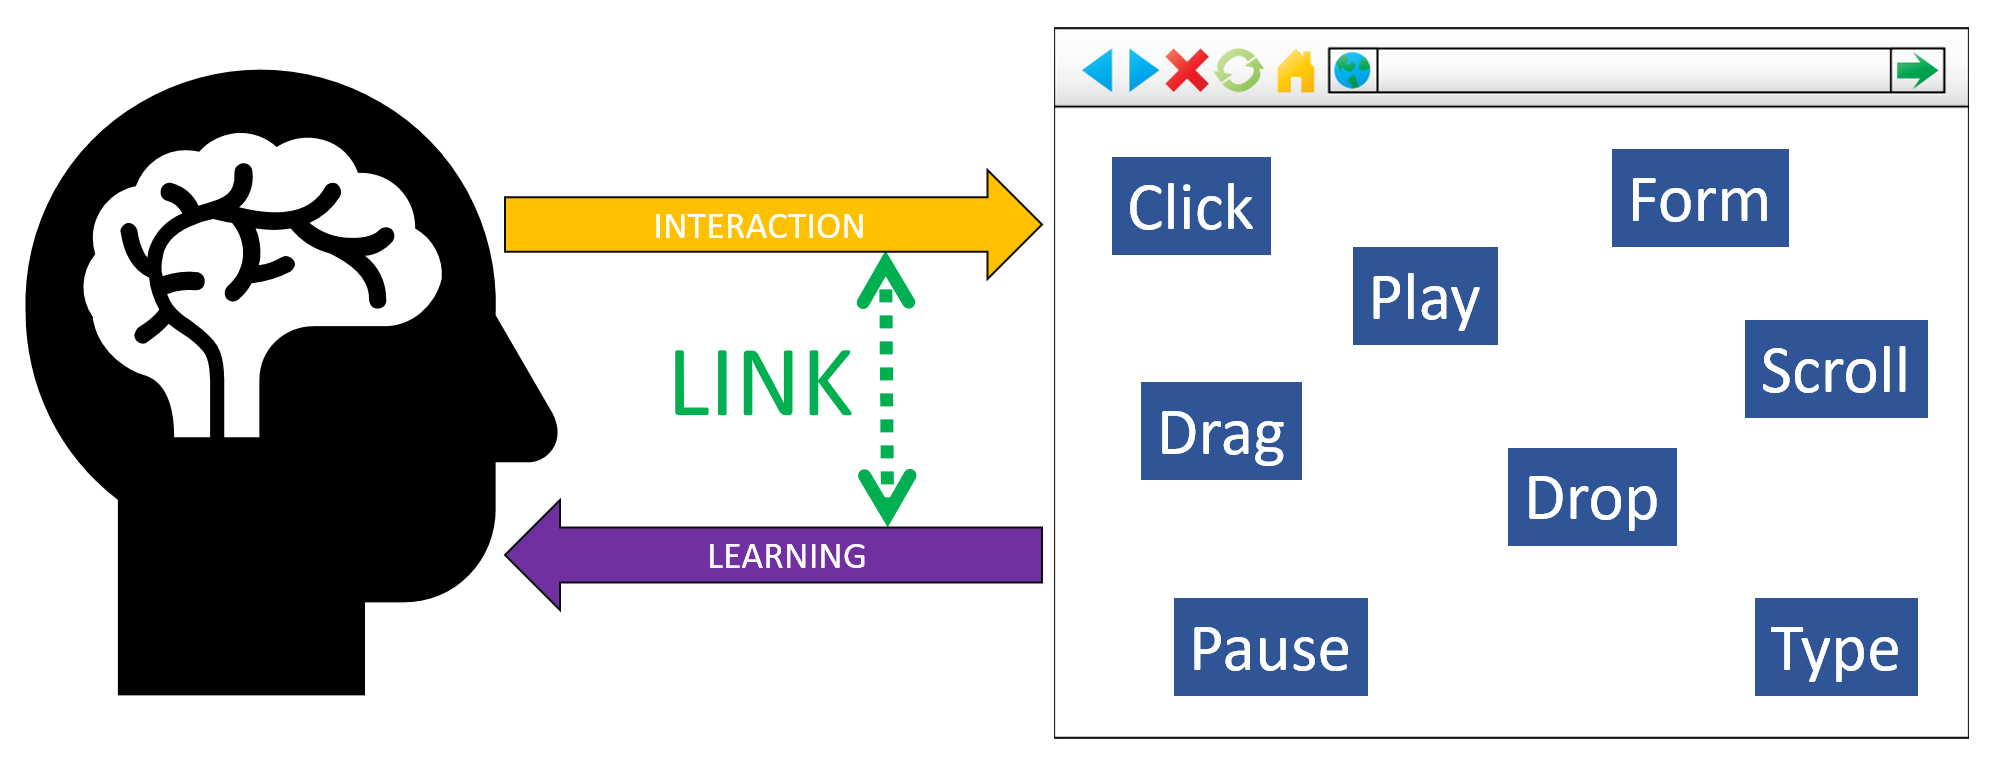 Interaction and Learning